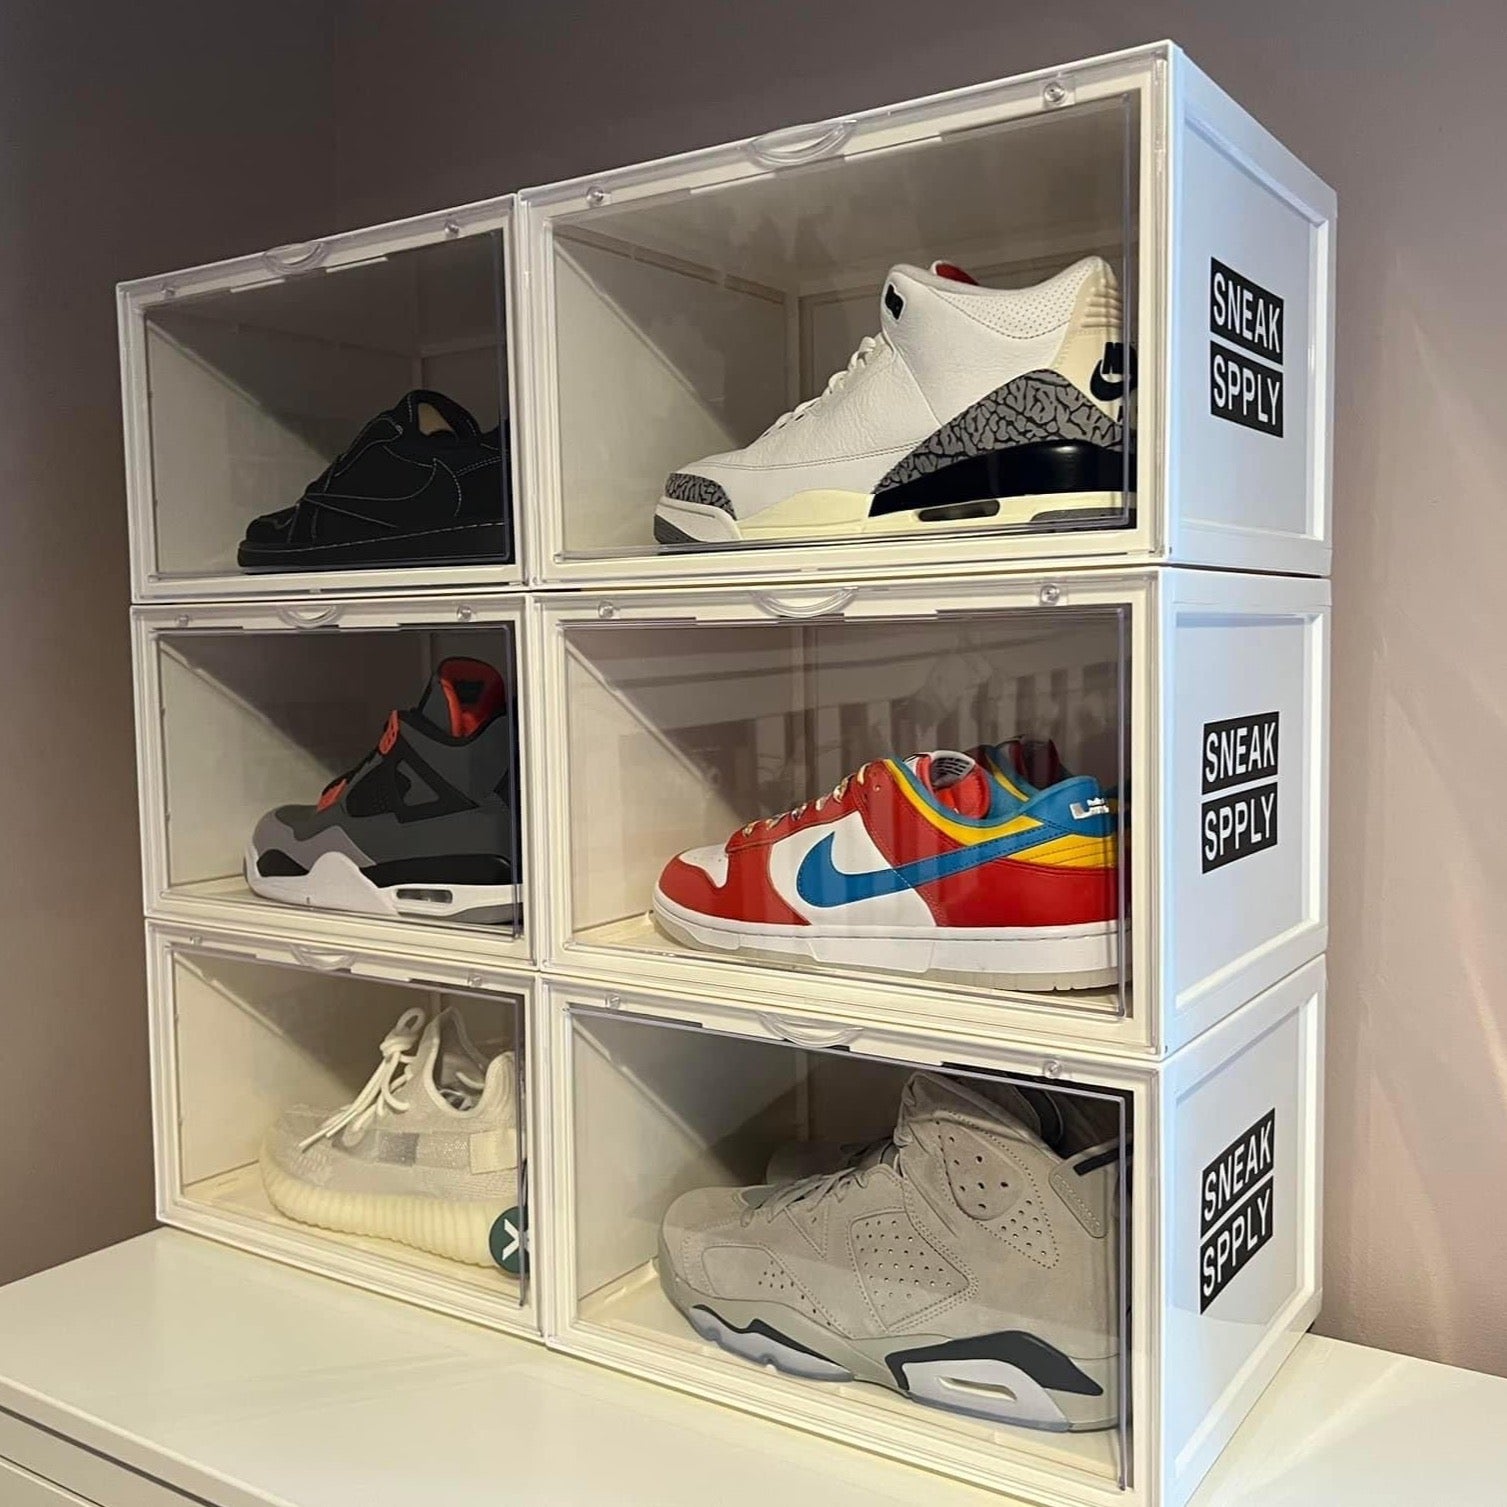 STACK V1 Sneaker Display Crates - White (2 Pack)